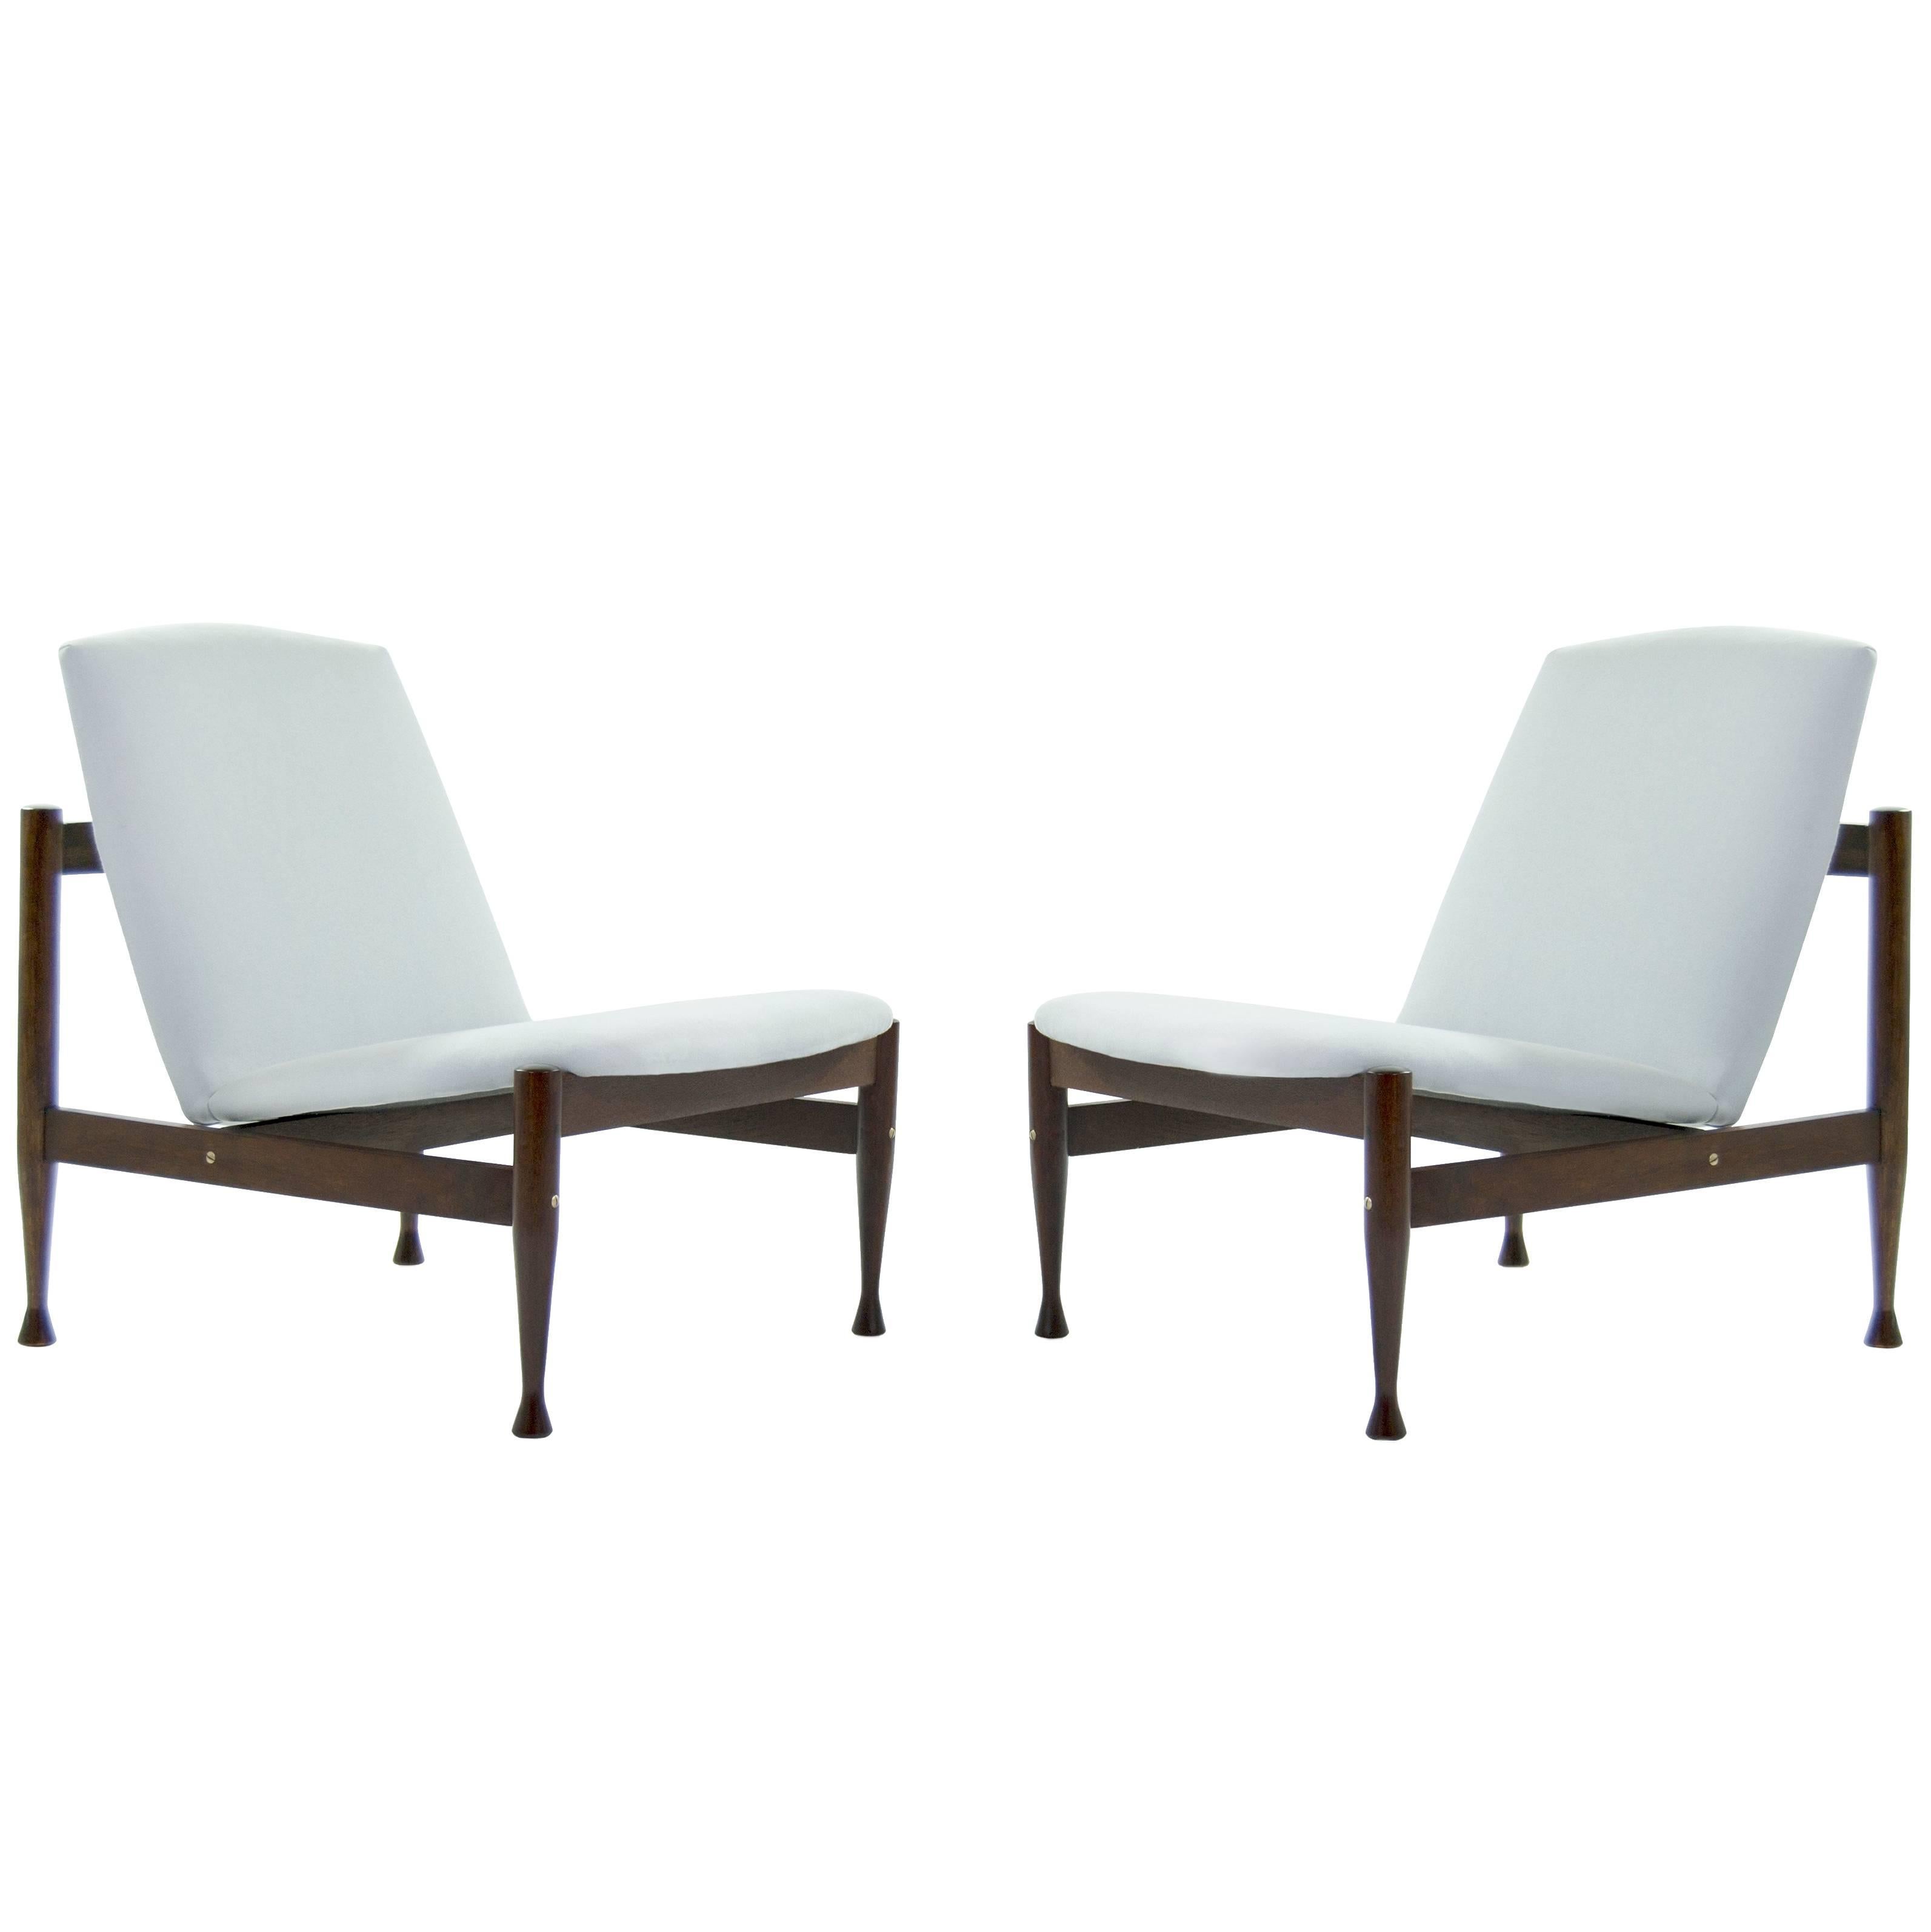 Danish Modern Brass Accented Lounge Chairs in the Style of Finn Juhl